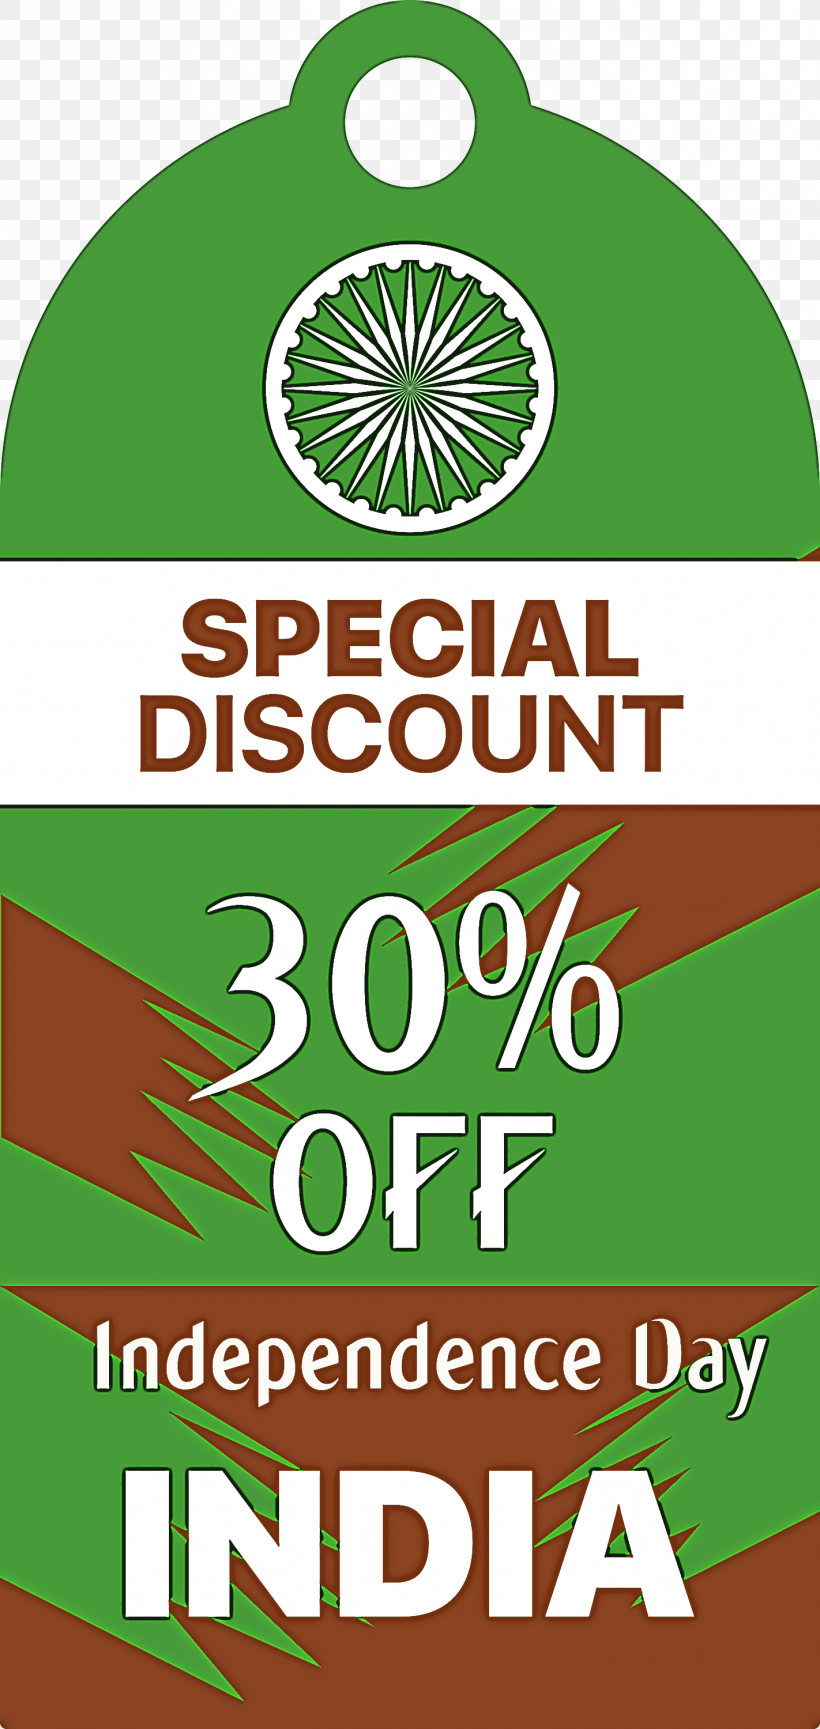 India Indenpendence Day Sale Tag India Indenpendence Day Sale Label, PNG, 1422x3000px, India Indenpendence Day Sale Tag, Green, India, India Indenpendence Day Sale Label, Indian Army Download Free